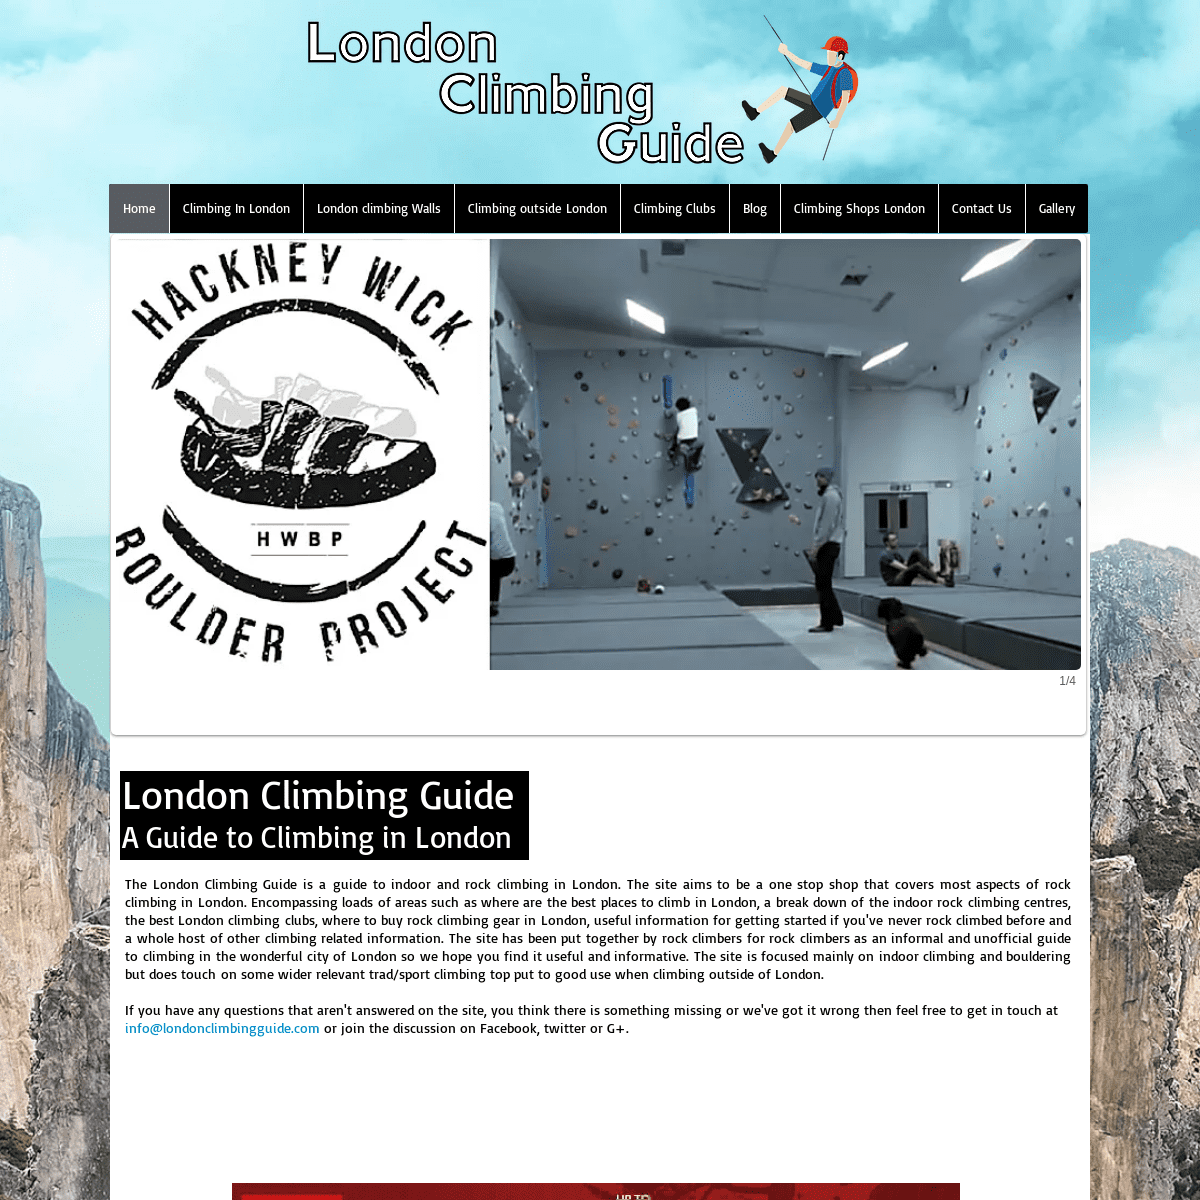 A complete backup of londonclimbingguide.com